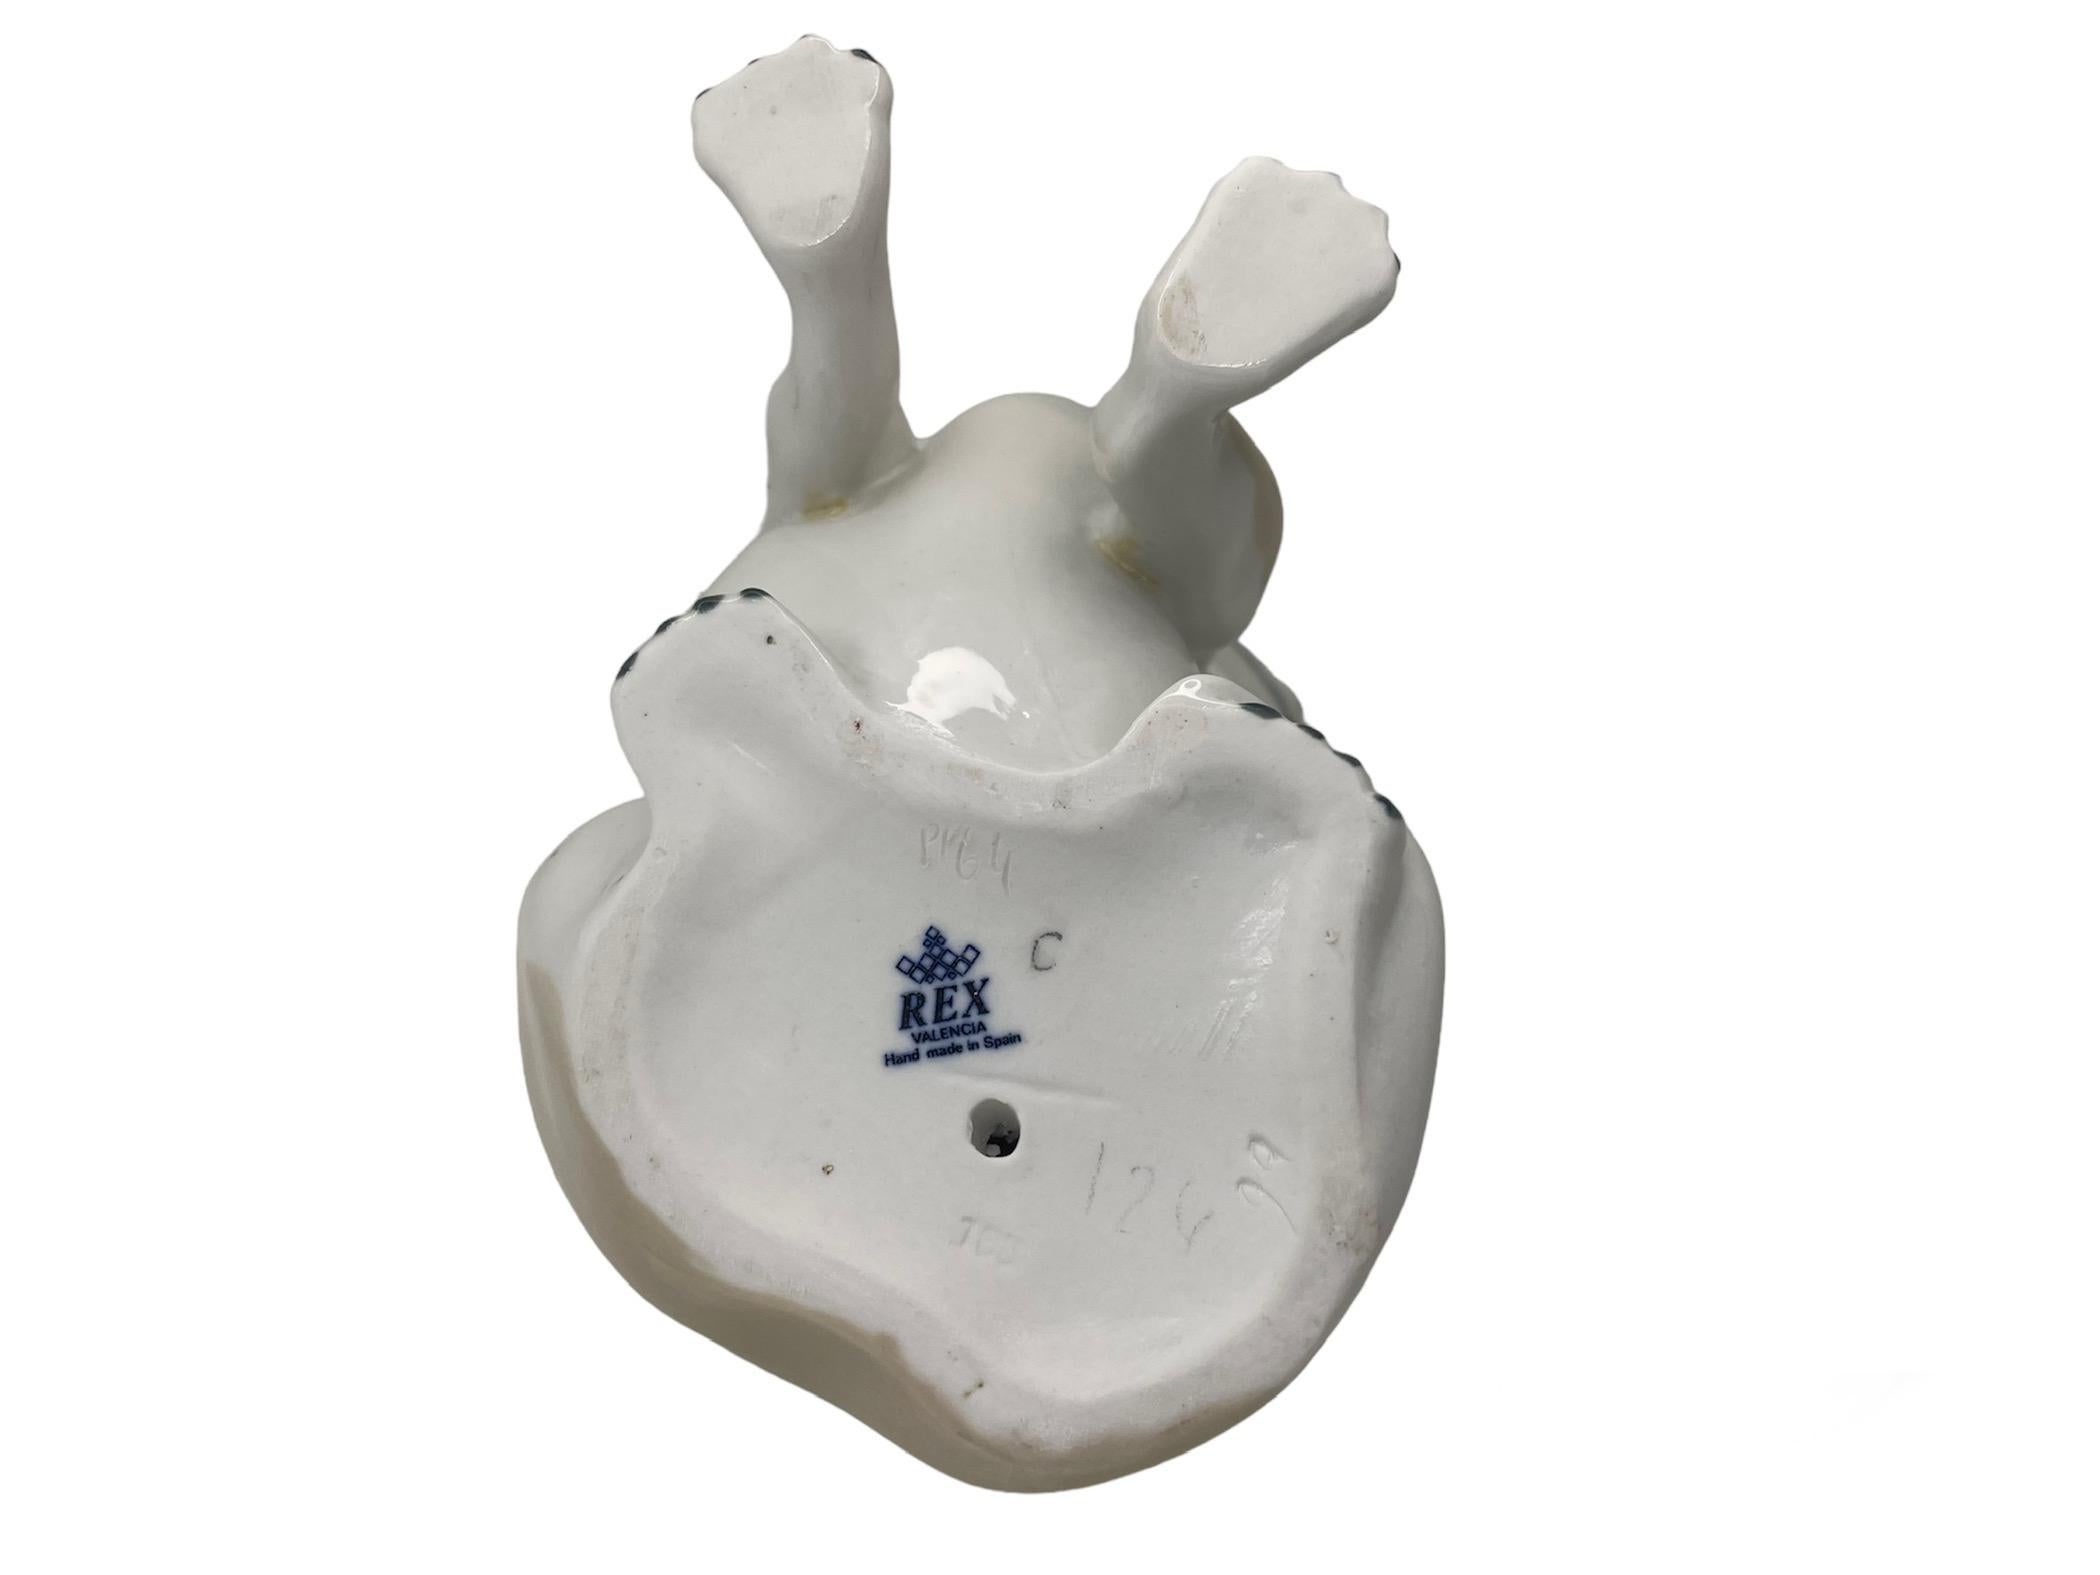 Rex Valencia Porcelain Figurine Of A Hummelwerk Dog In Good Condition For Sale In Guaynabo, PR